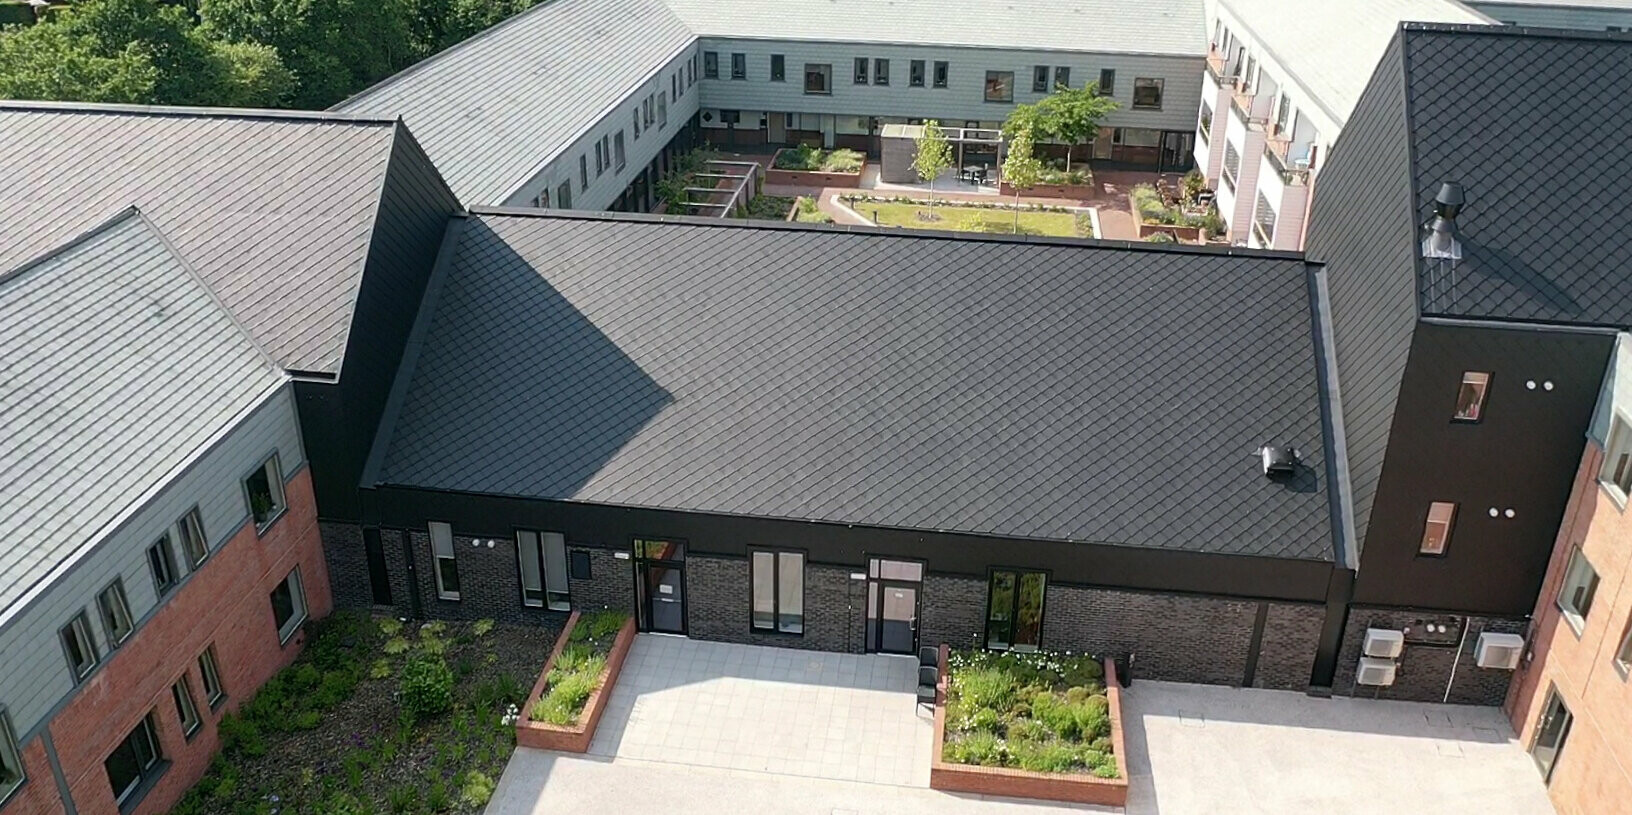 Bird's eye view of the residential care home in Preston that is clad with PREFA rhomboid roof and facade tiles 29 × 29 in P.10 Black.